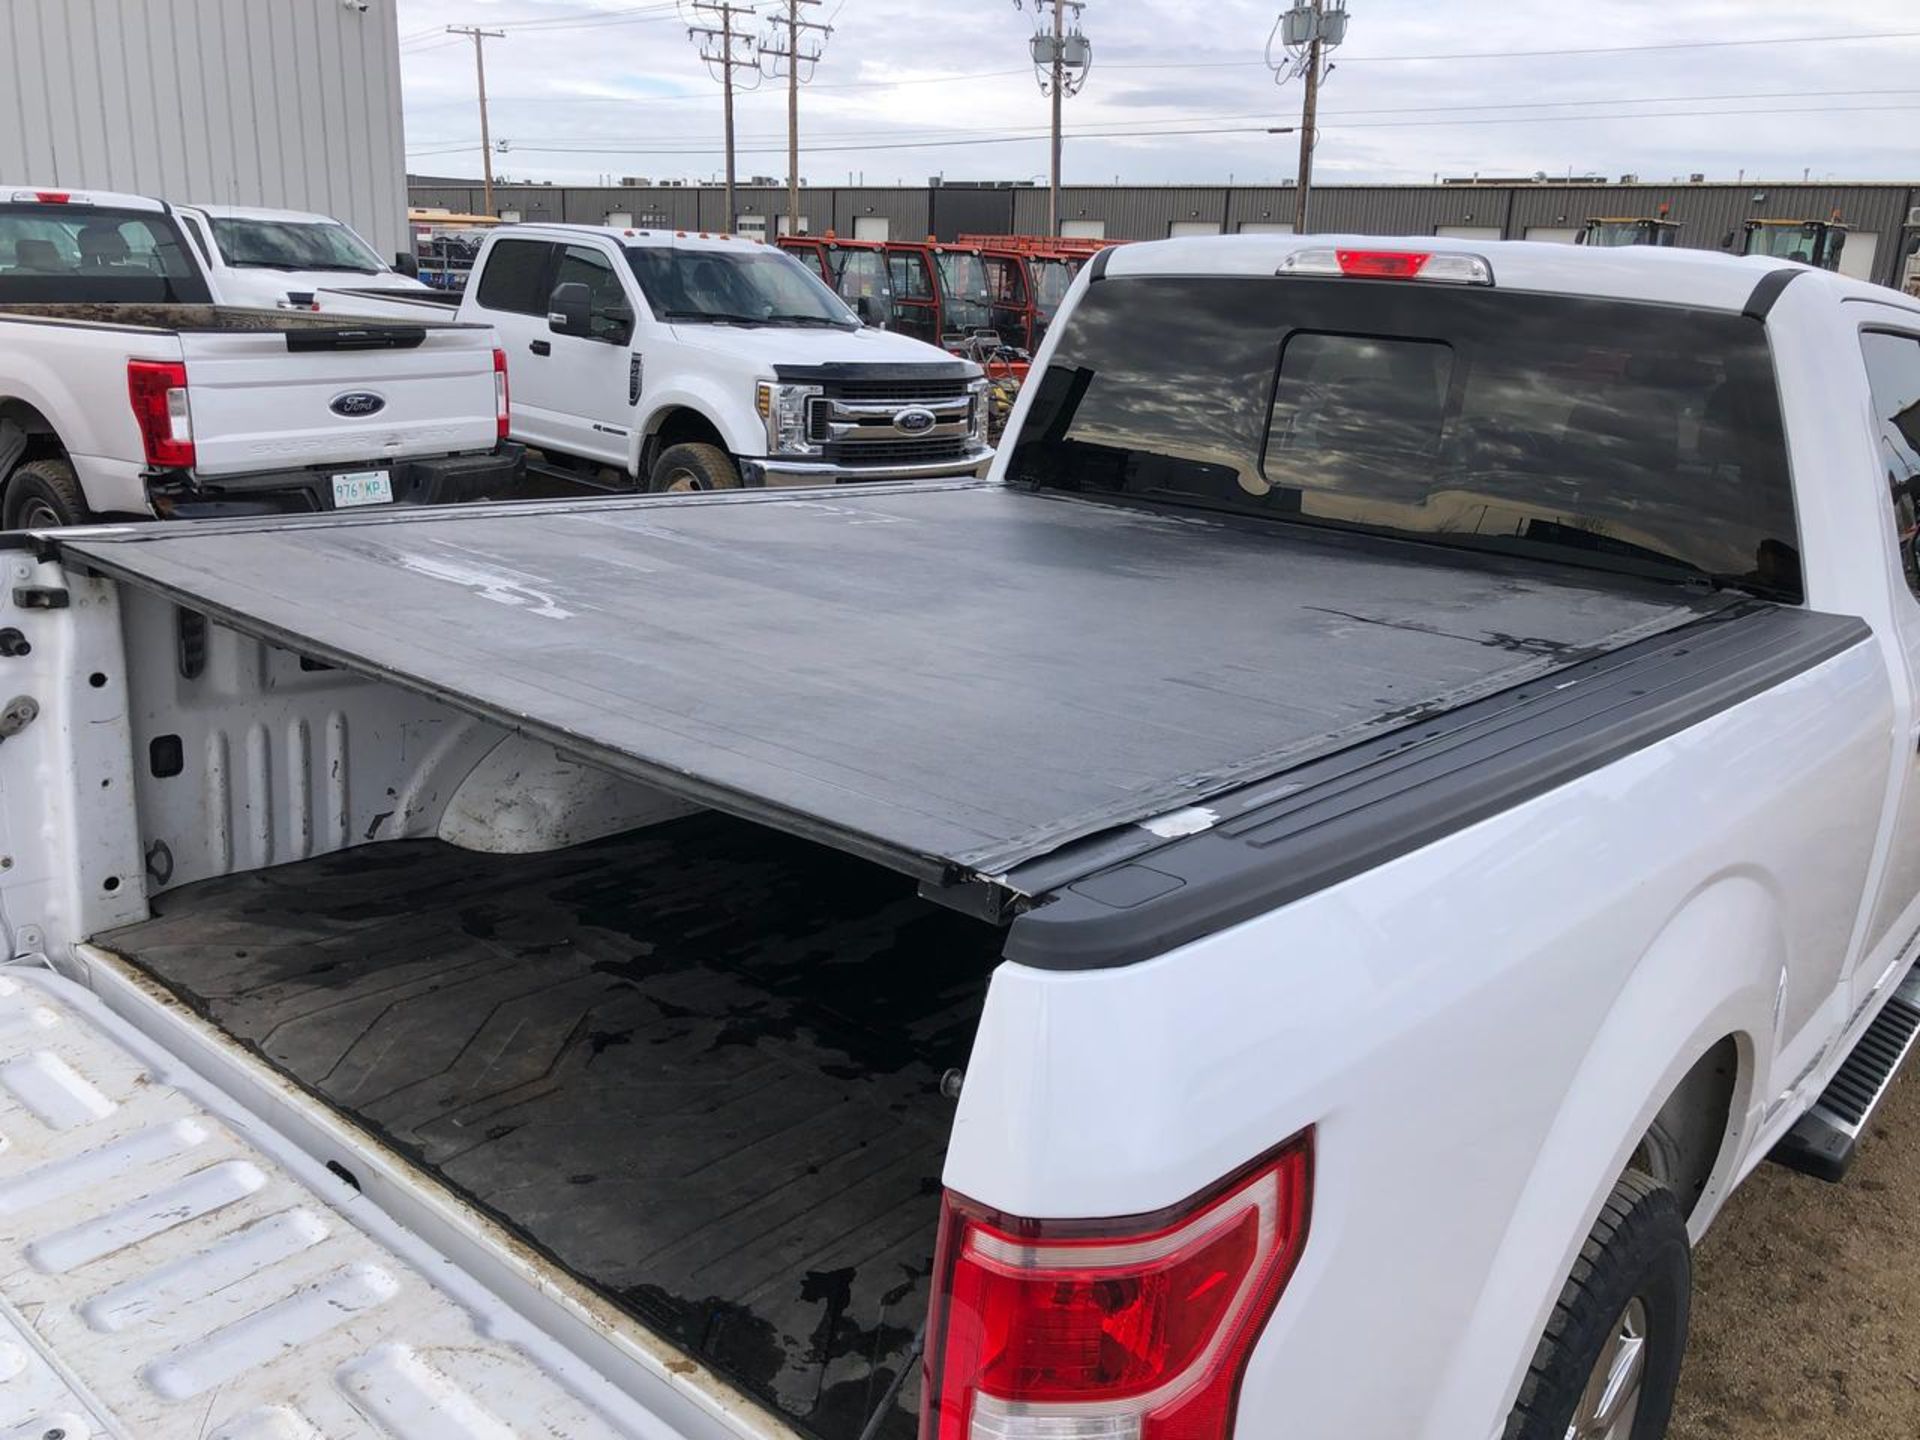 2018 Ford F150 Pick-up Truck - Image 6 of 13